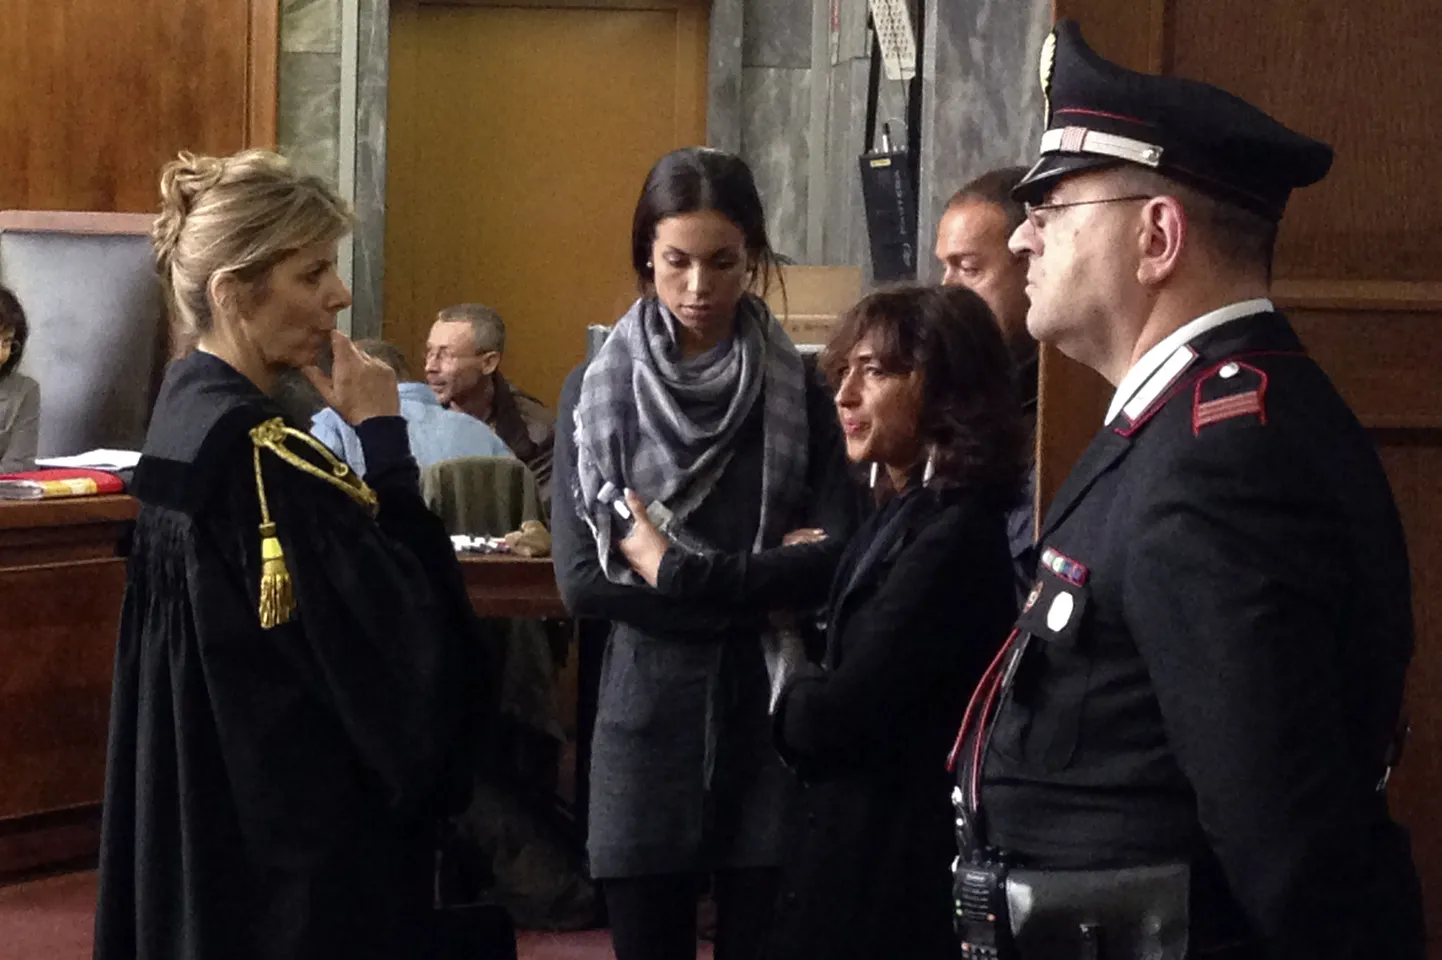 TALY, Milan : This picture taken with a smartphone shows Moroccan-born Karima El-Mahroug, nicknamed "Ruby the Heart Stealer" (C), during a pause of a session of former Prime Minister Silvio Berlusconi's trial for having sex with an underage prostitute and abuse of office on May 17, 2013 at Milan's tribunal.The hearing is one of the last in a trial that began two years ago and relates to alleged crimes in 2010 when Berlusconi was still prime minister and revolves around alleged raunchy "bunga bunga" parties at his luxury residence outside Milan. AFP PHOTO / OLIVIER MORIN